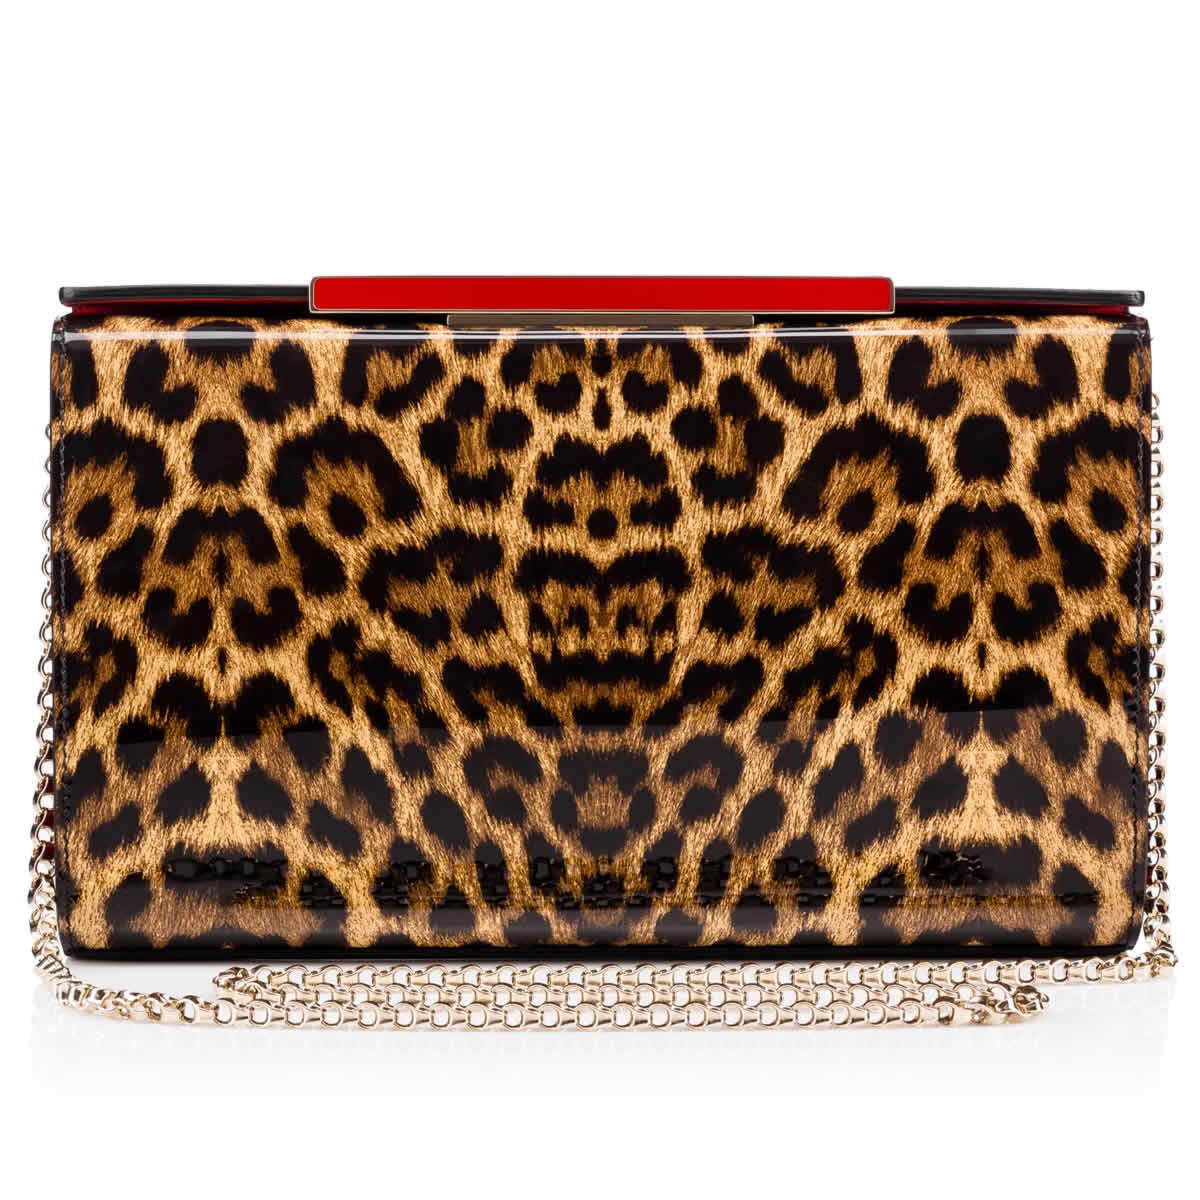 CHRISTIAN LOUBOUTIN VANITÉ SMALL LEOPARD PATENT LEATHER CLUTCH, BROWN ...